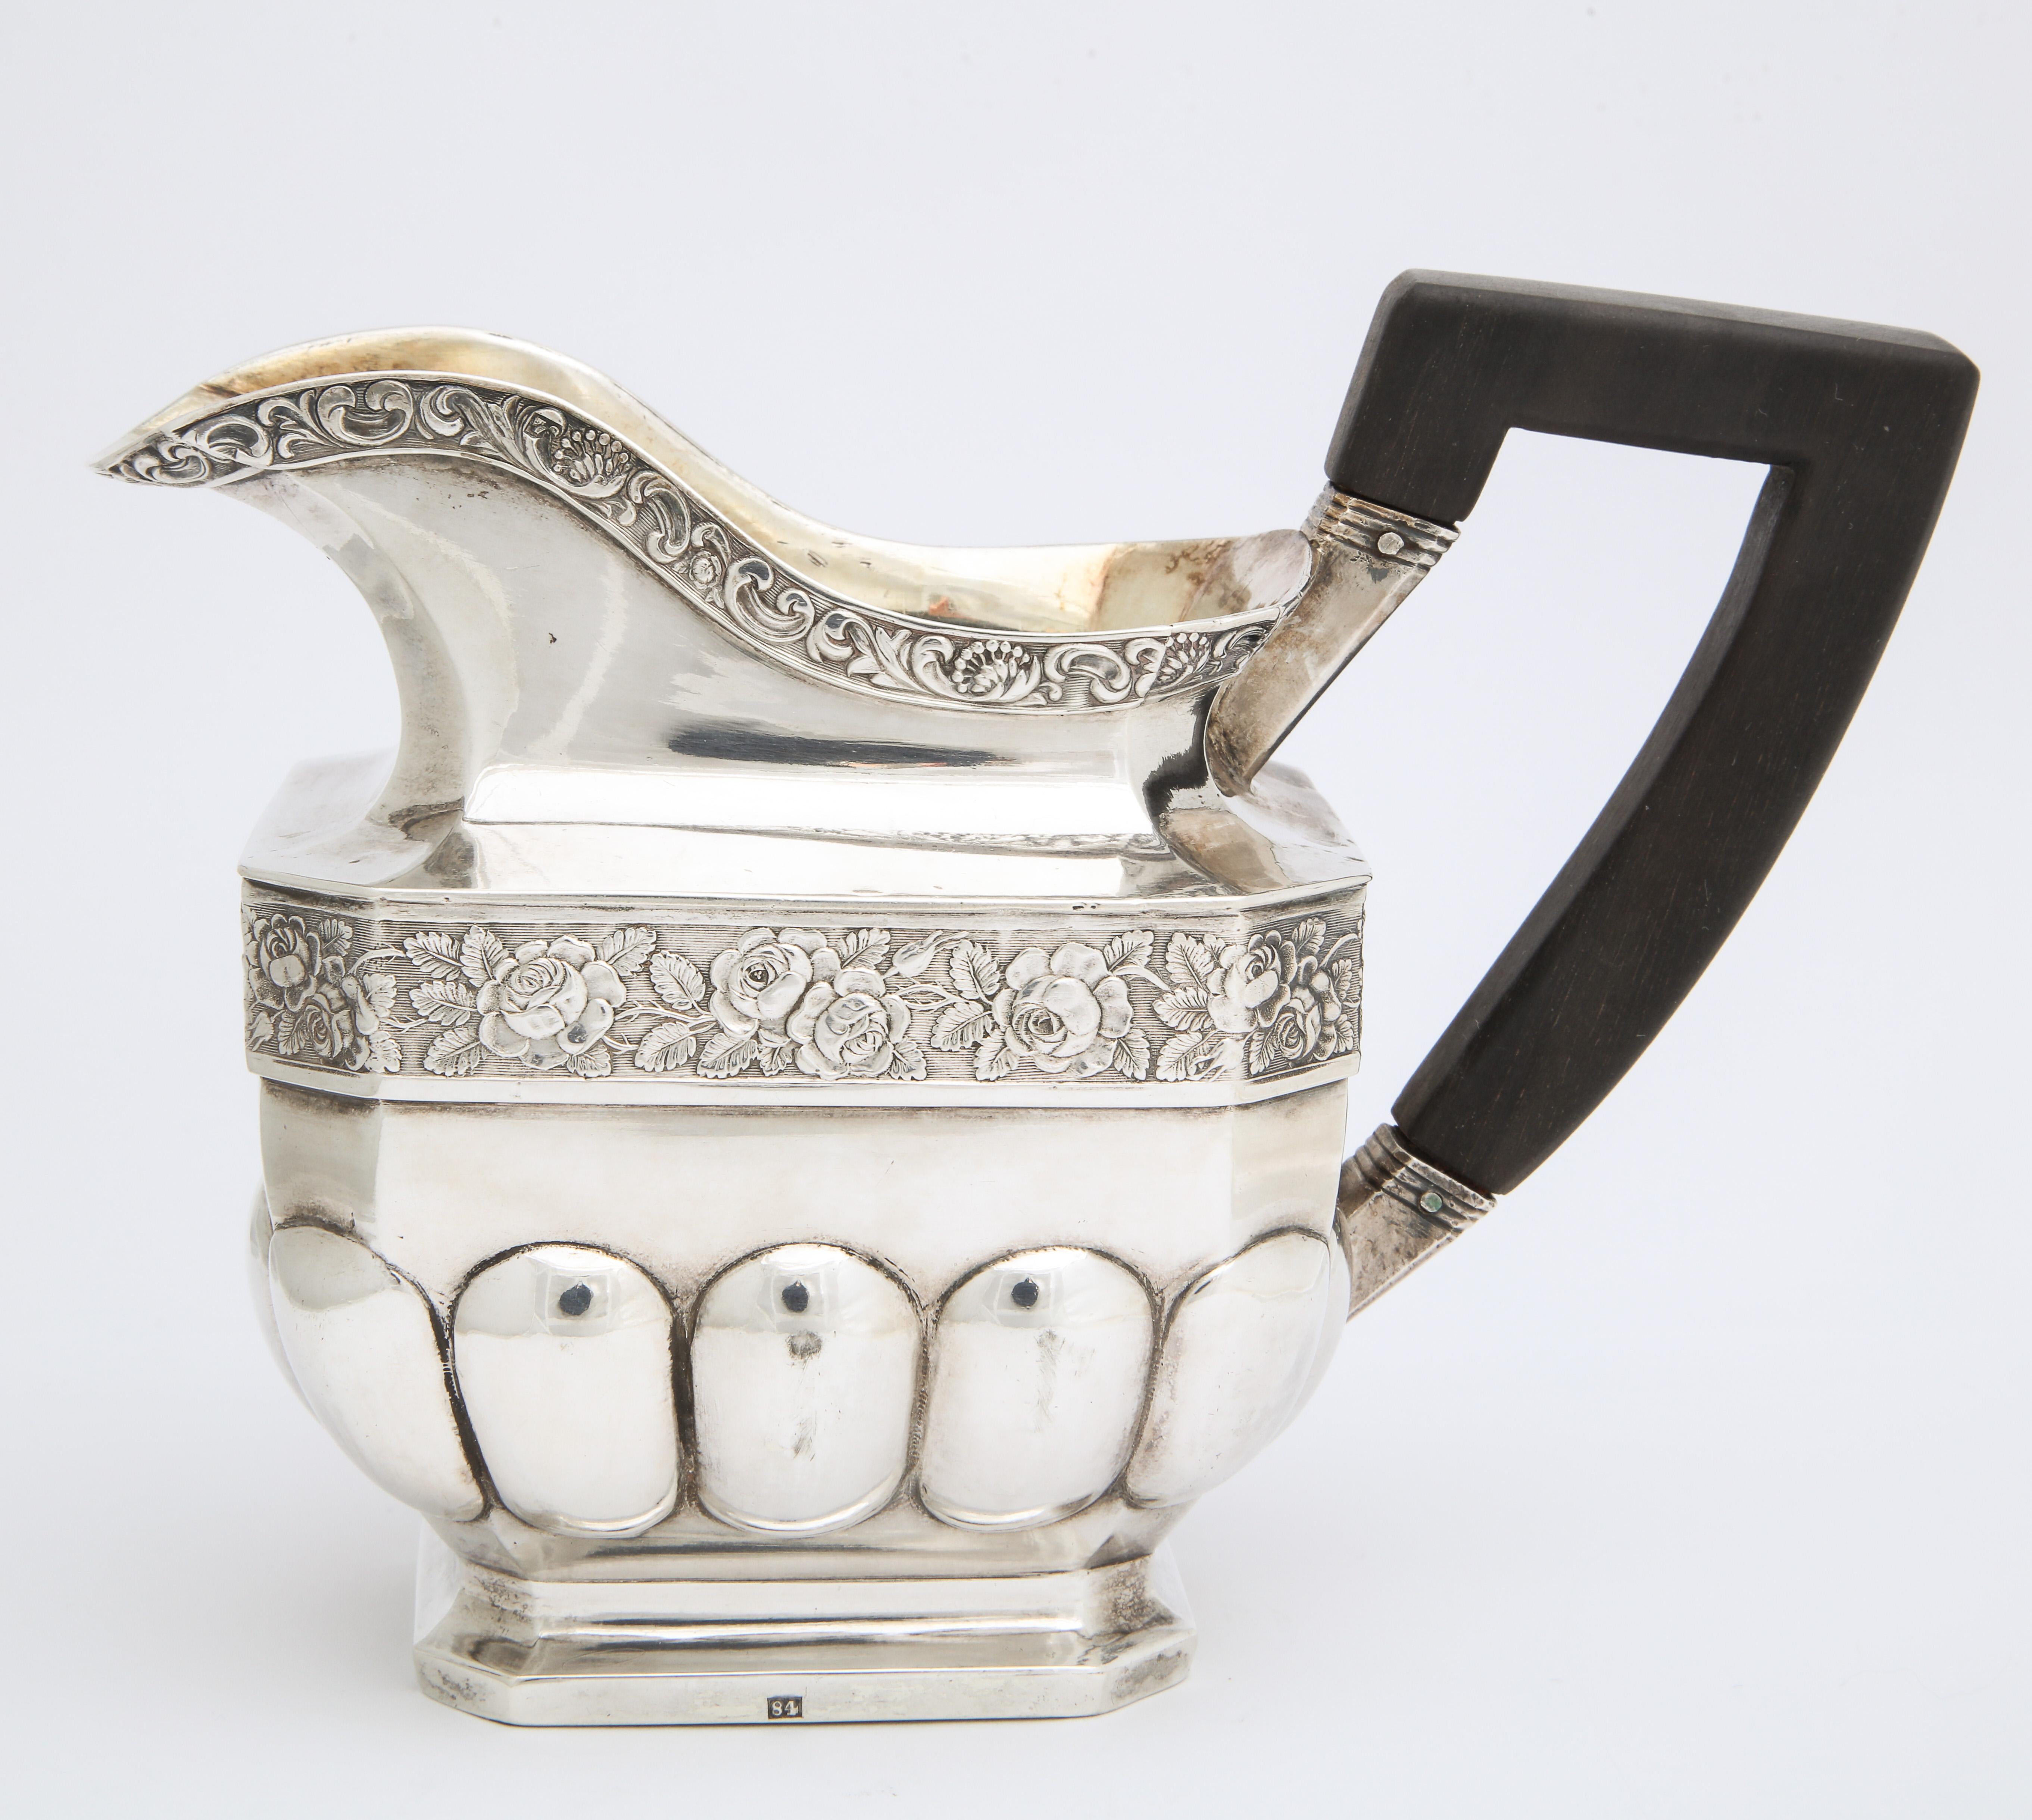 From the Romanov era, period of Tsar Nicholas I (1825-55), this large silver cream jug was made in the ancient capital of Moscow. Of rectangular outline with canted corners, the lobed lower section below a central band of repoussé flowers, the